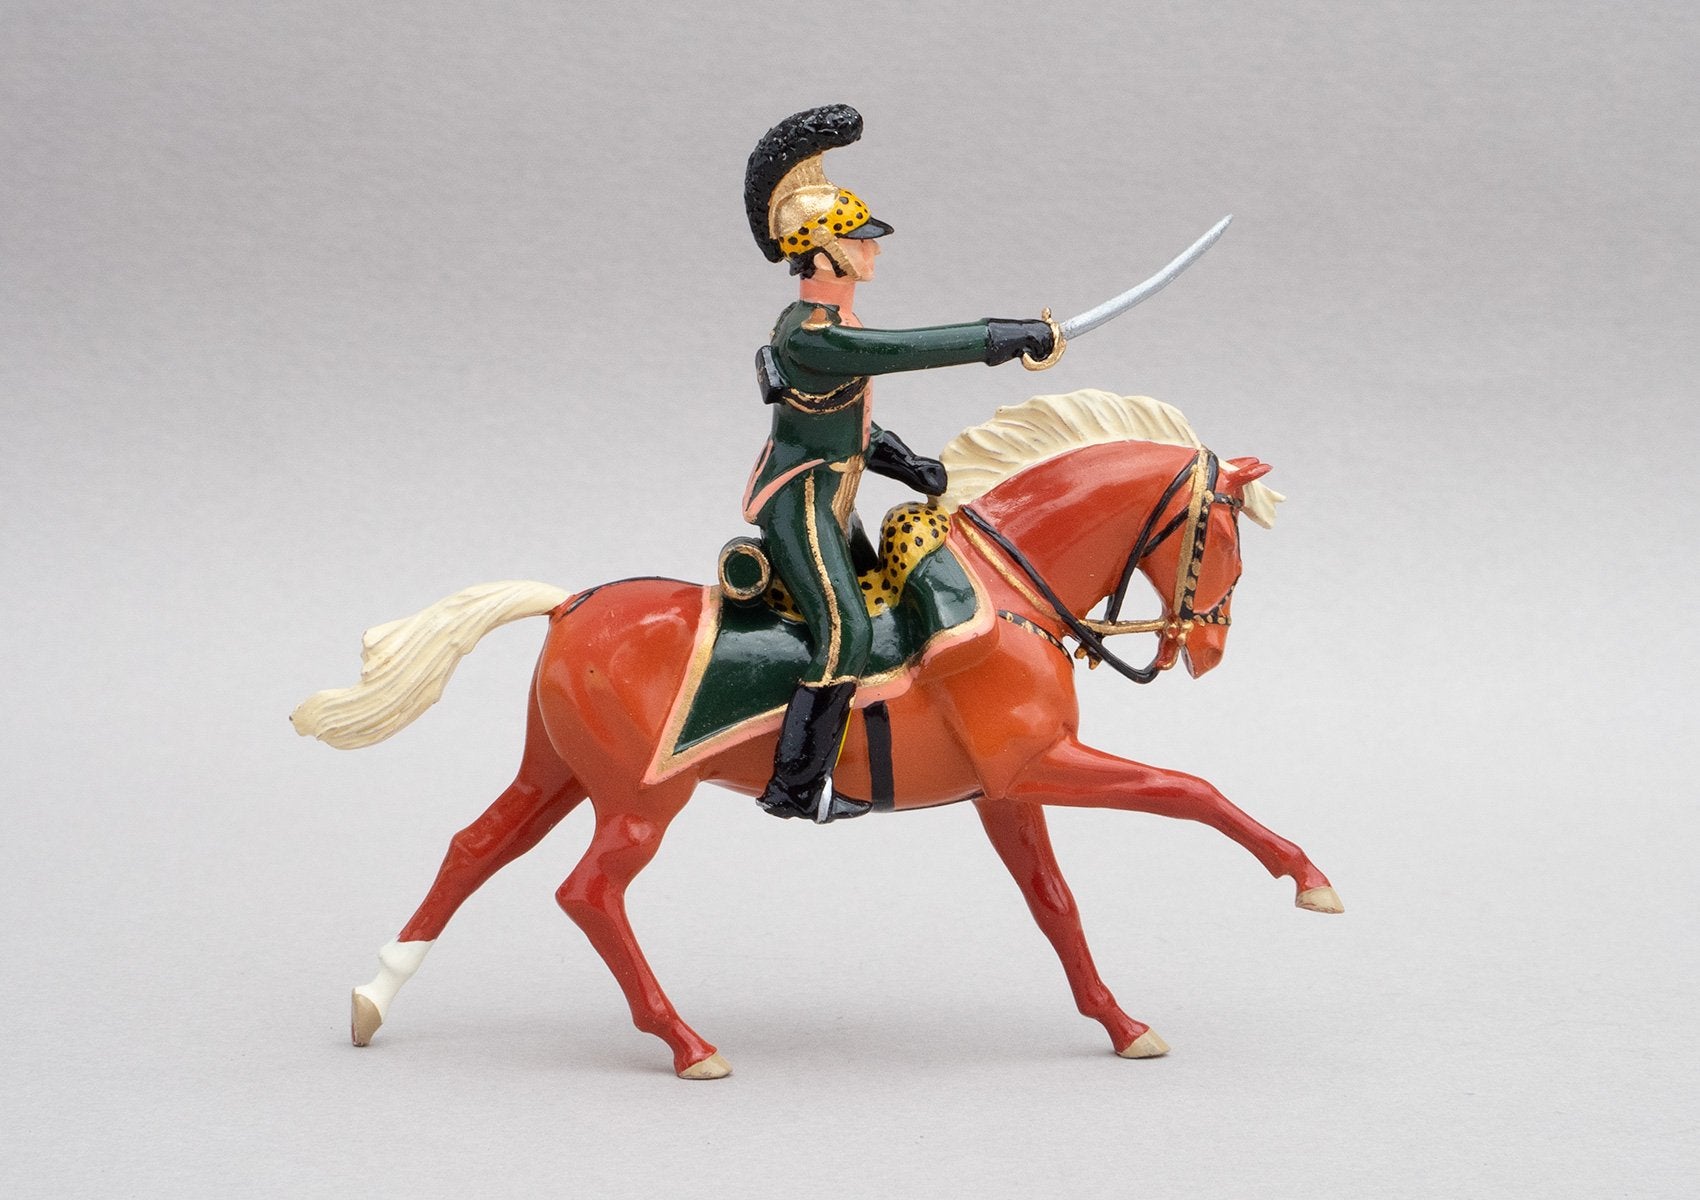 Set 132 Officer 3rd Chevau-Legers Lancers | French Cavalry | Napoleonic Wars | Single mounted officer on flaxen chestnut horse | Waterloo | © Imperial Productions | Sculpt by David Cowe